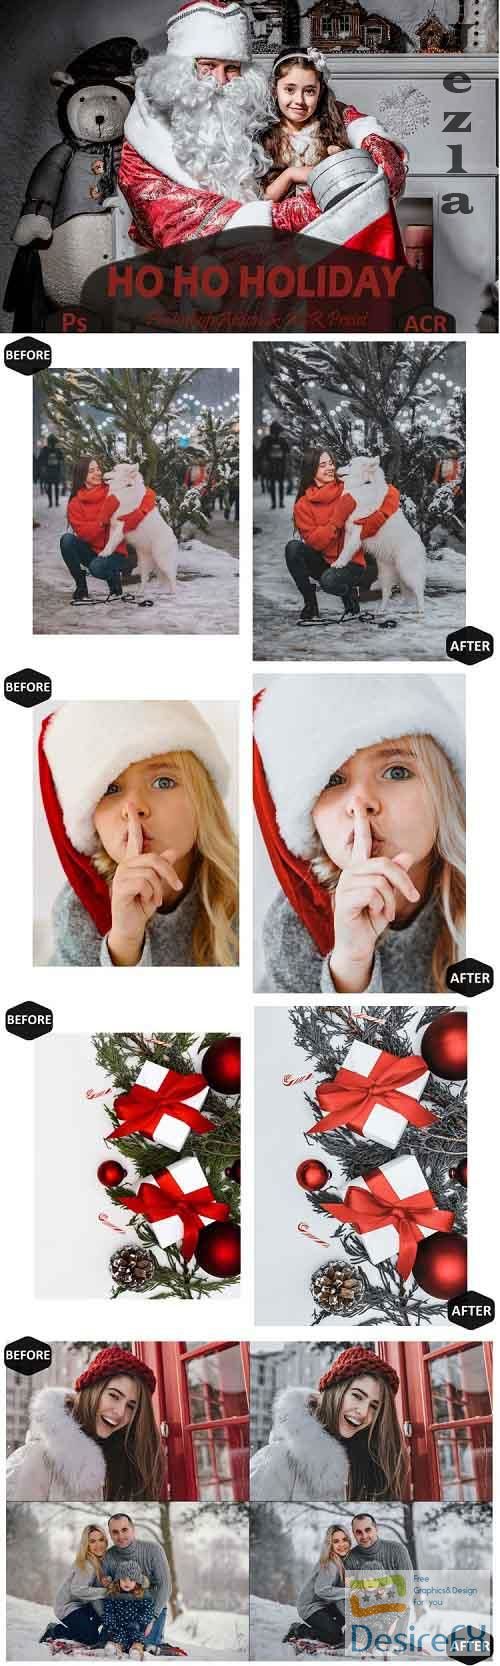 10 Ho Ho Holiday Photoshop Actions And ACR Presets, Ps Xmas - 972216